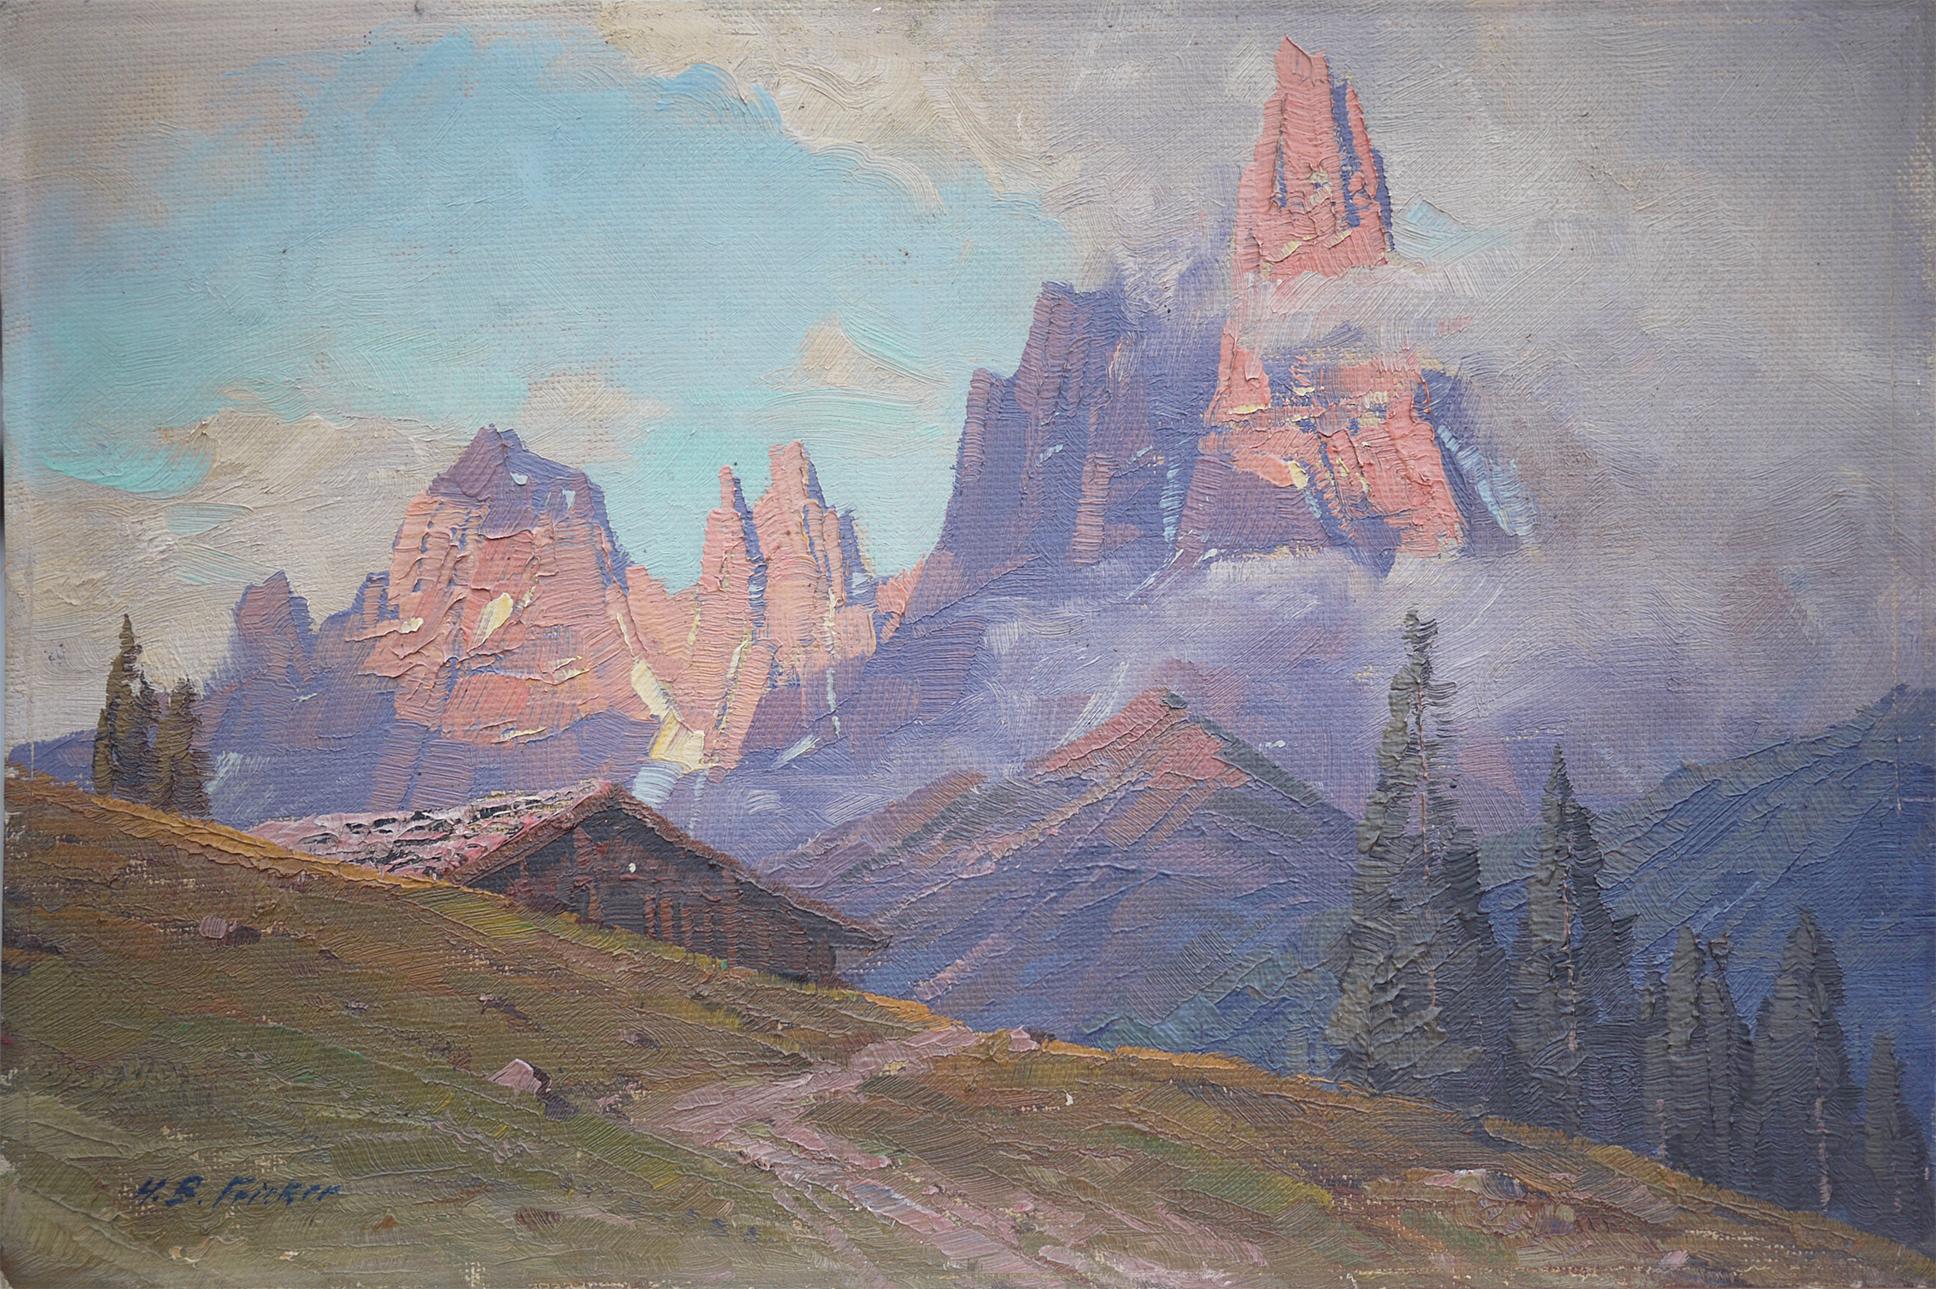 Pale di San Martino - Italian Dolomites

25 cm x 37 cm without frame - 37 cm x 49 cm with frame in antique fir
9.8 in x 14.6 in without frame - 14.6 in x 19.3 in with frame in antique fir

Oil on board - circa 1920

View of the 